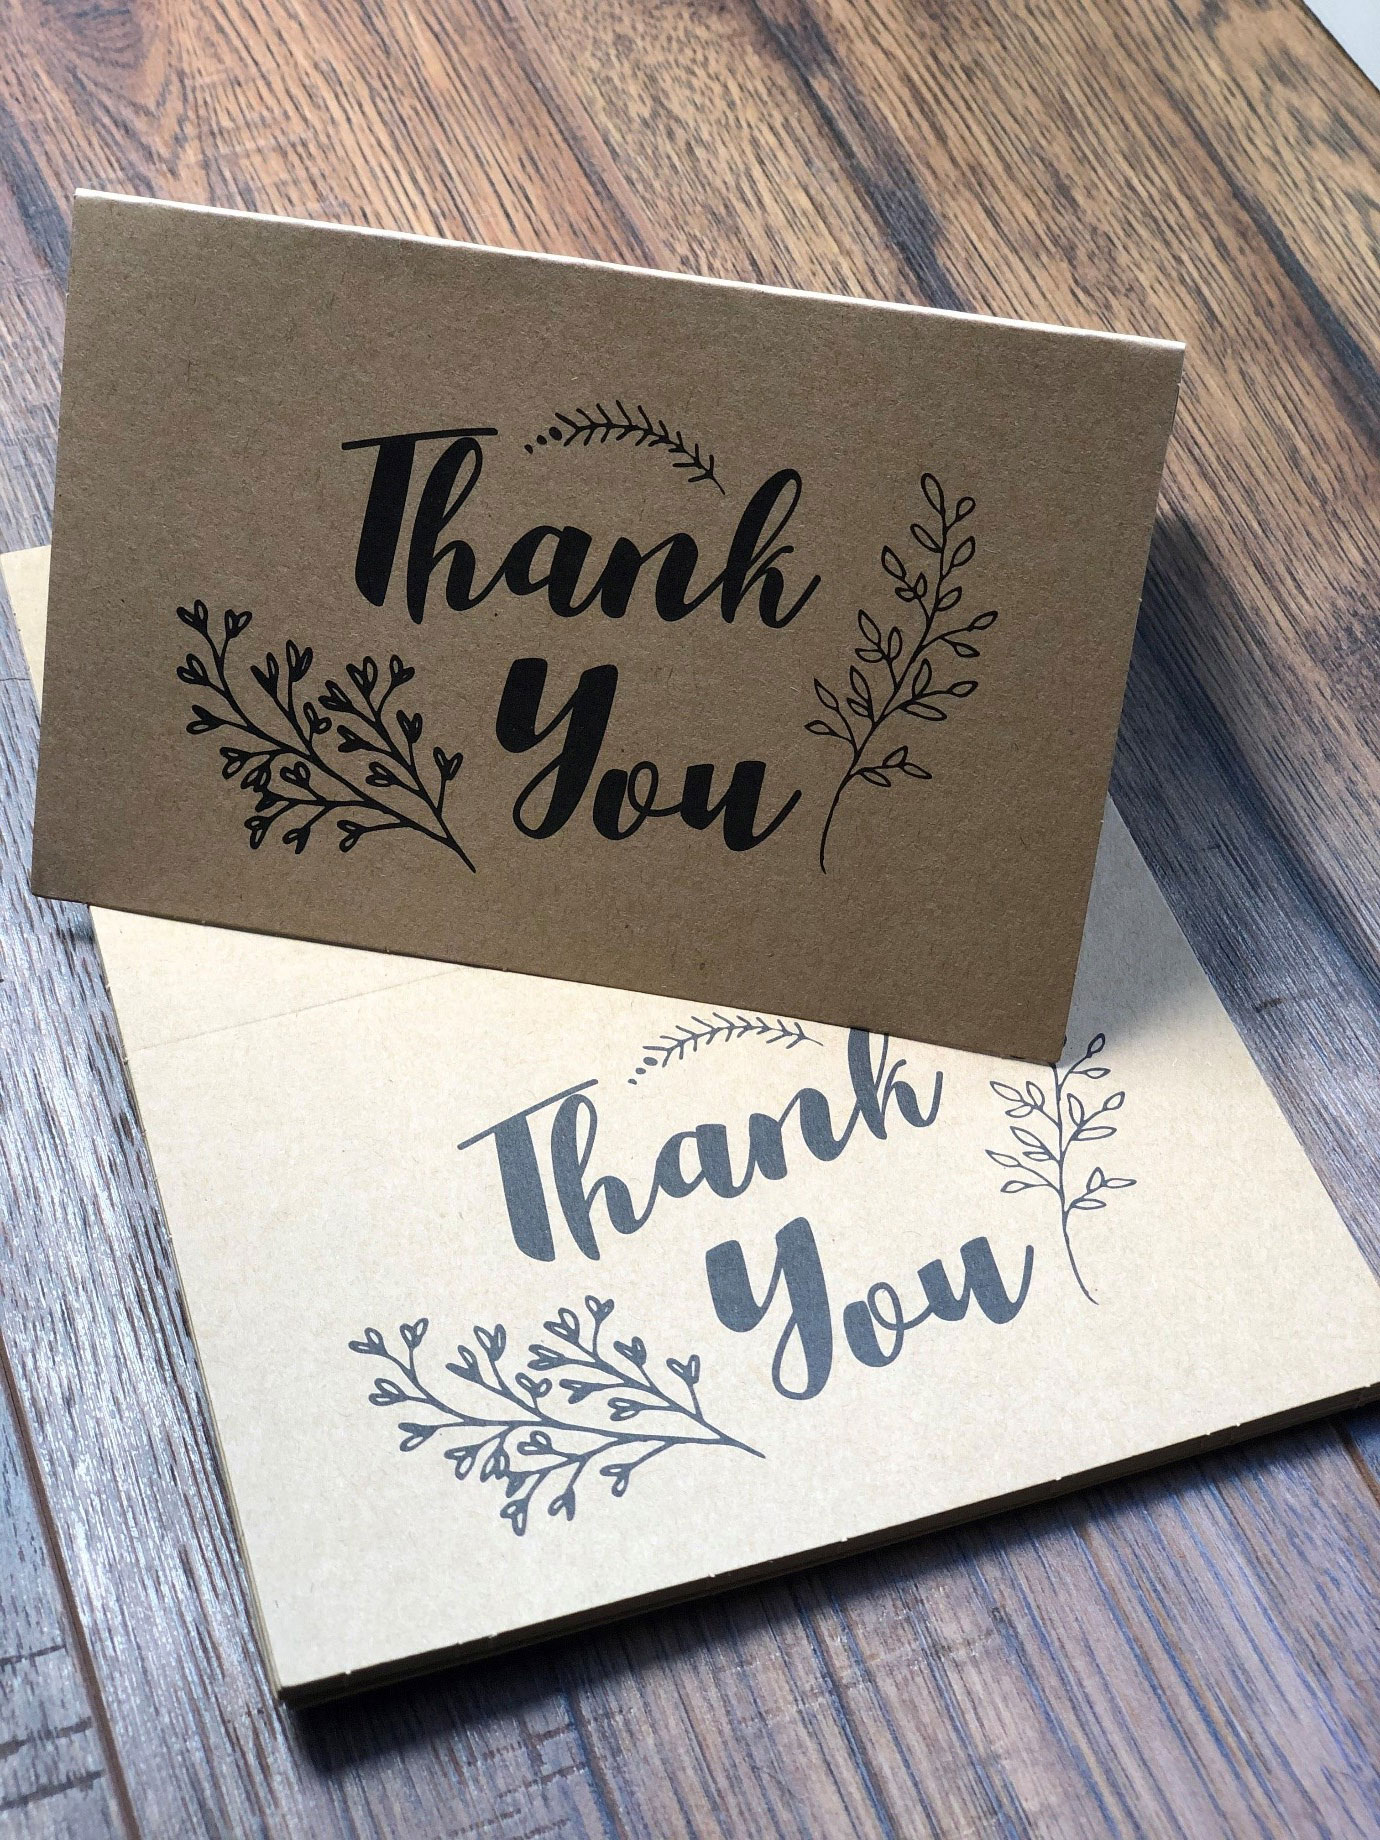 Thank you cards